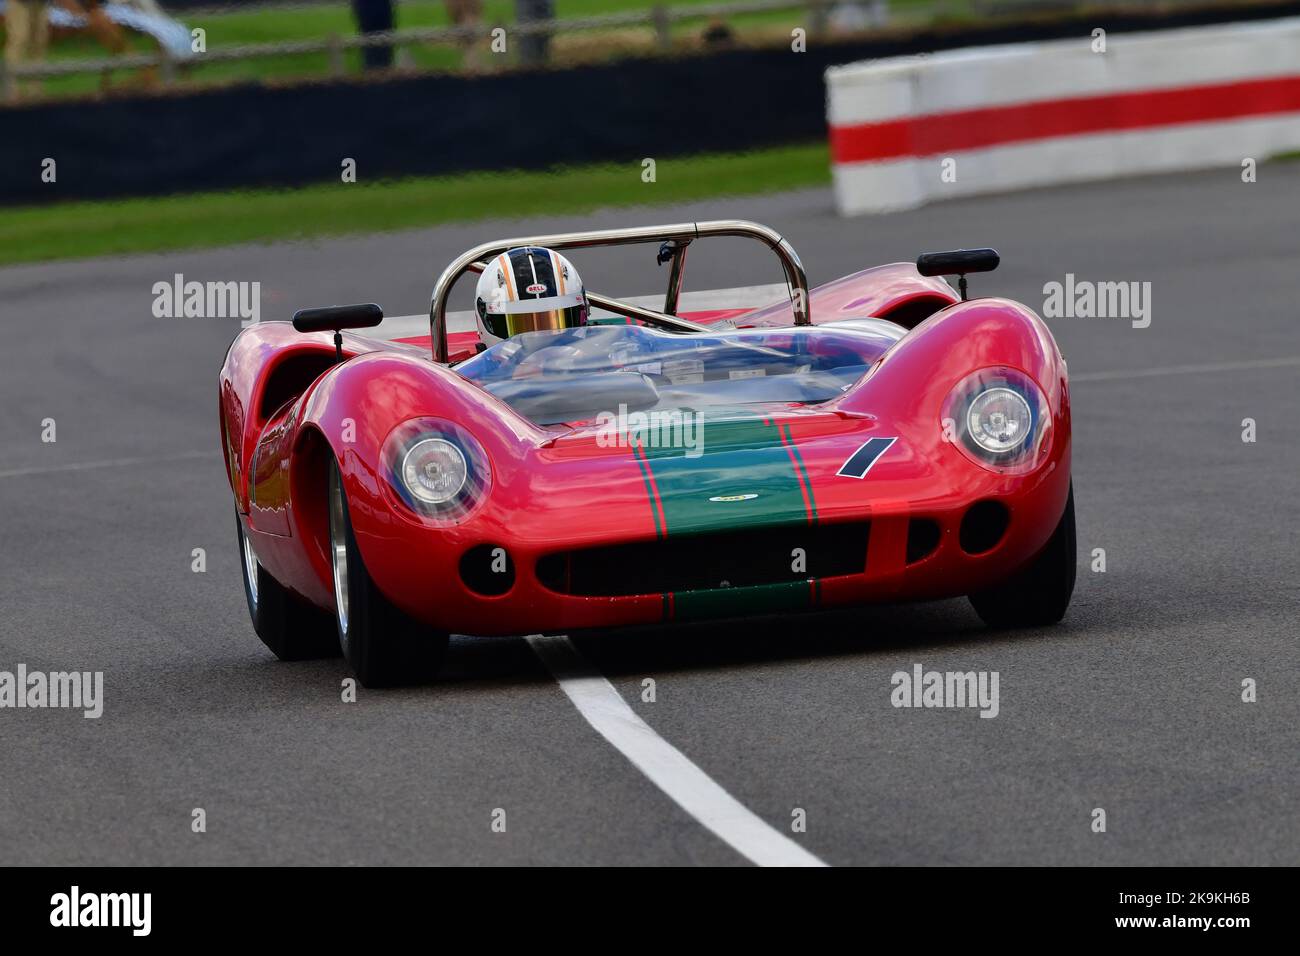 Anthony Sinclair, Lola-Chevrolet T70 Spyder, Whitsun Trophy, Whitsun Trophy, twenty five minutes of racing for unlimited sports cars that competed in Stock Photo